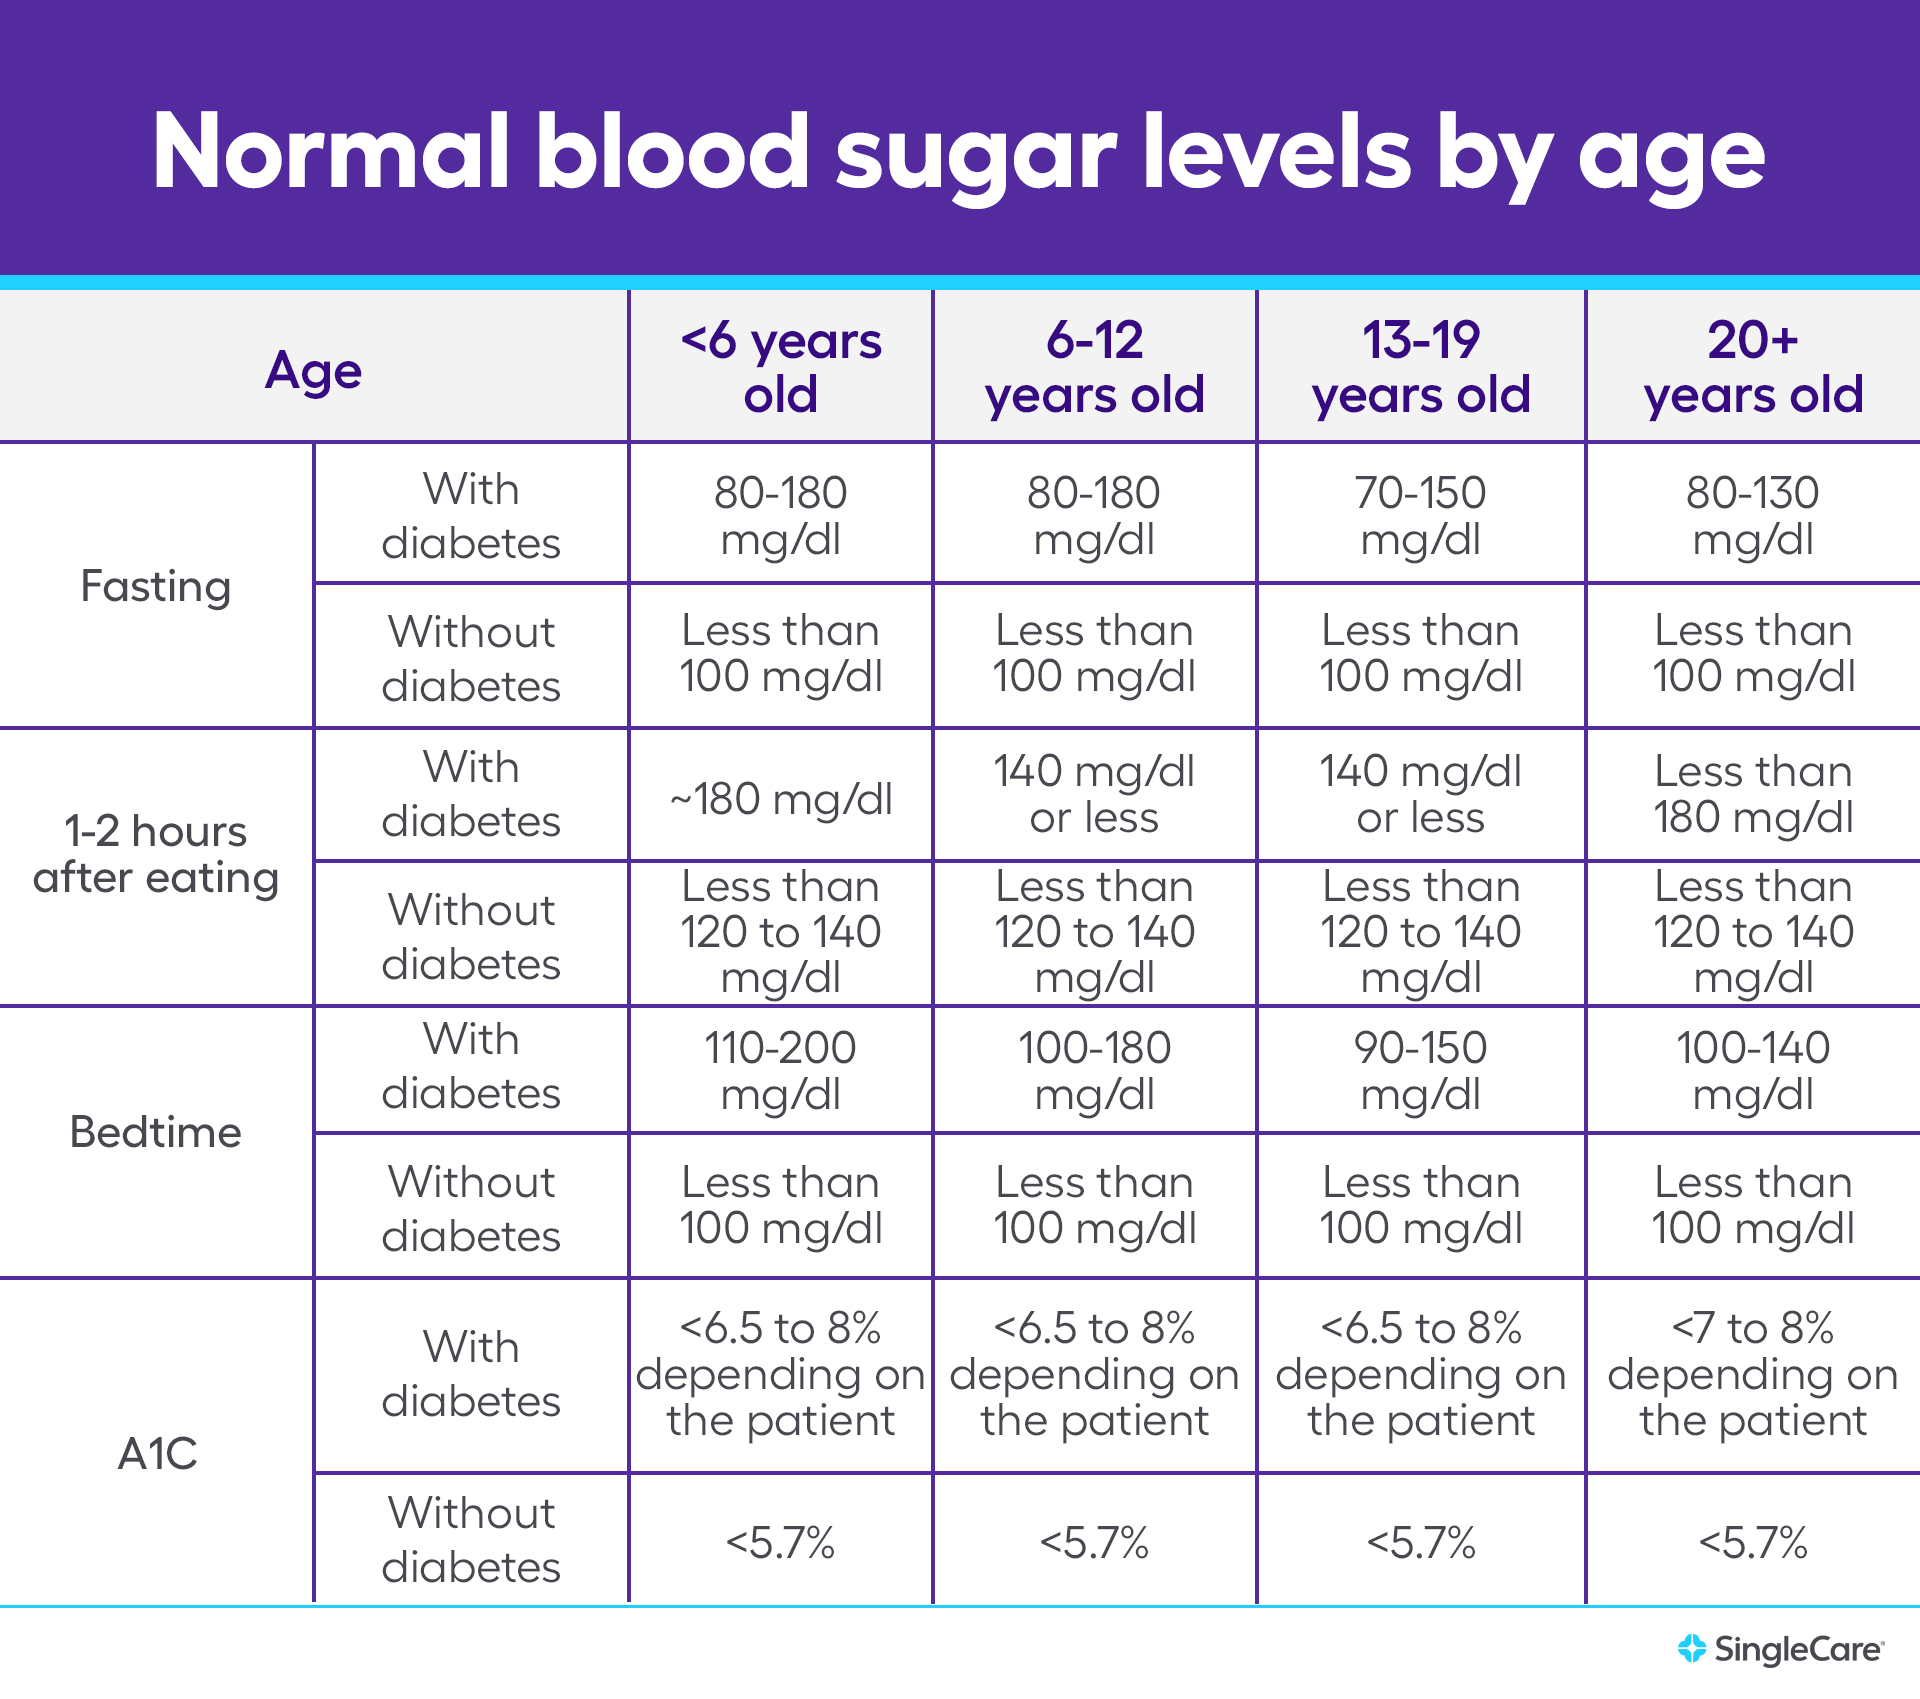 Aging and blood sugar levels